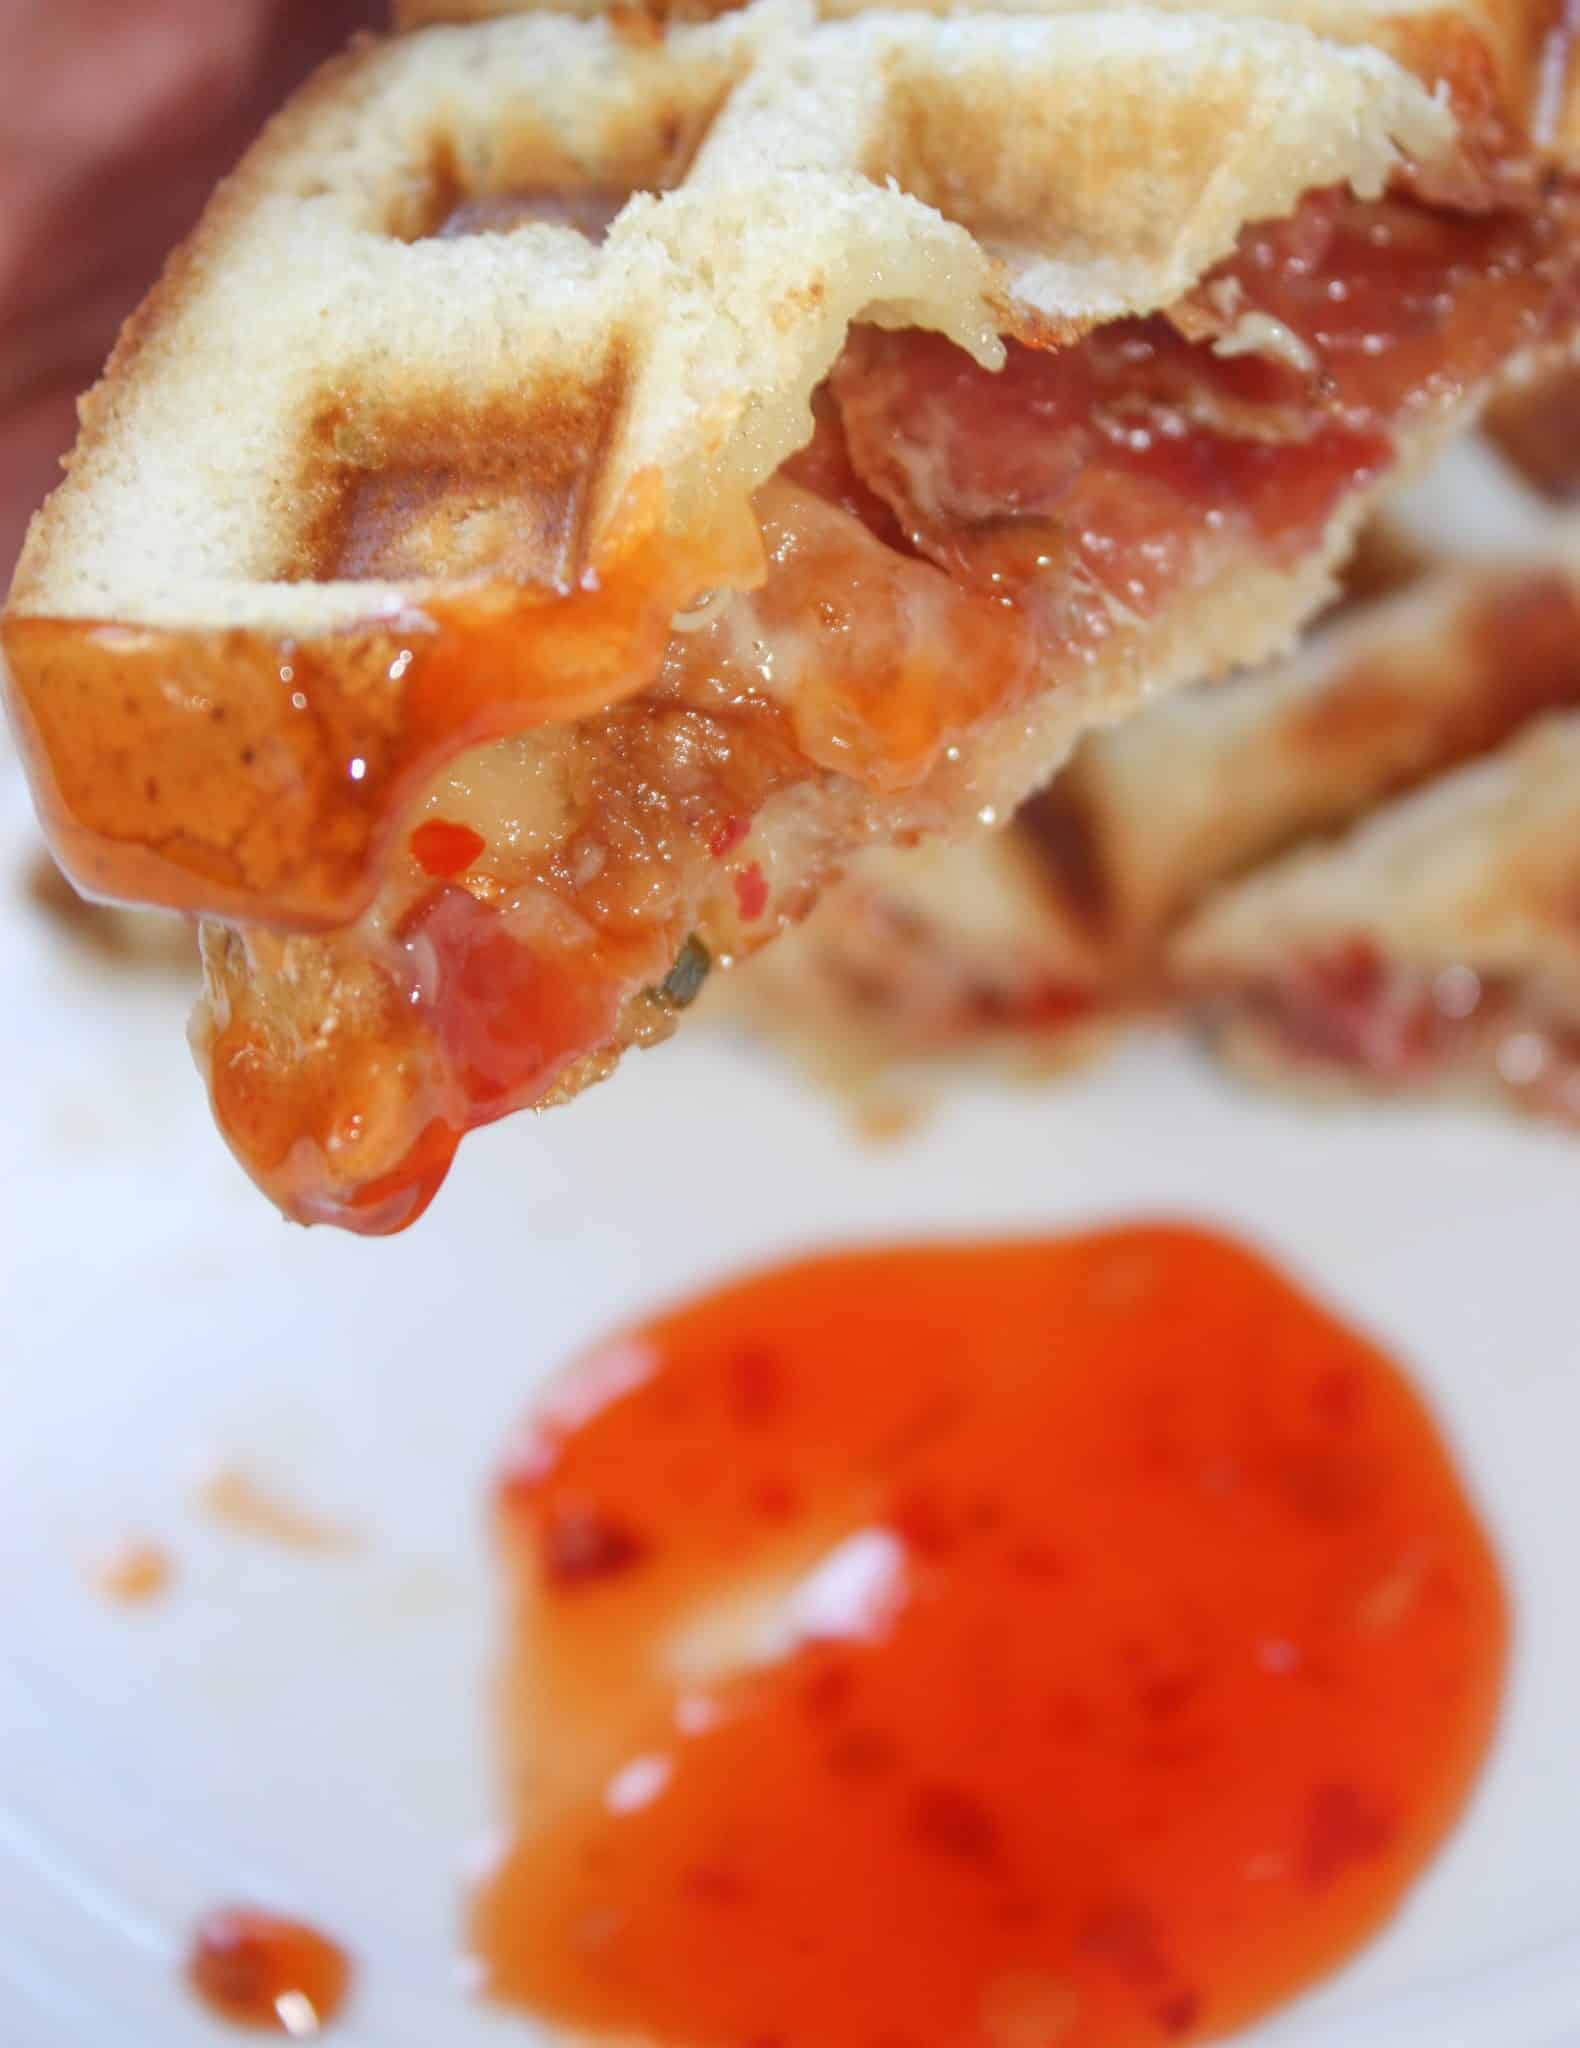 Peppery mozzarella cheese, topped with bacon slices, layered between slices of gluten free bread pressed in the waffle iron to create an appetizing delight.  Spicy Waffled Grilled Cheese with Bacon wakes up the taste buds with a burst of heat.  